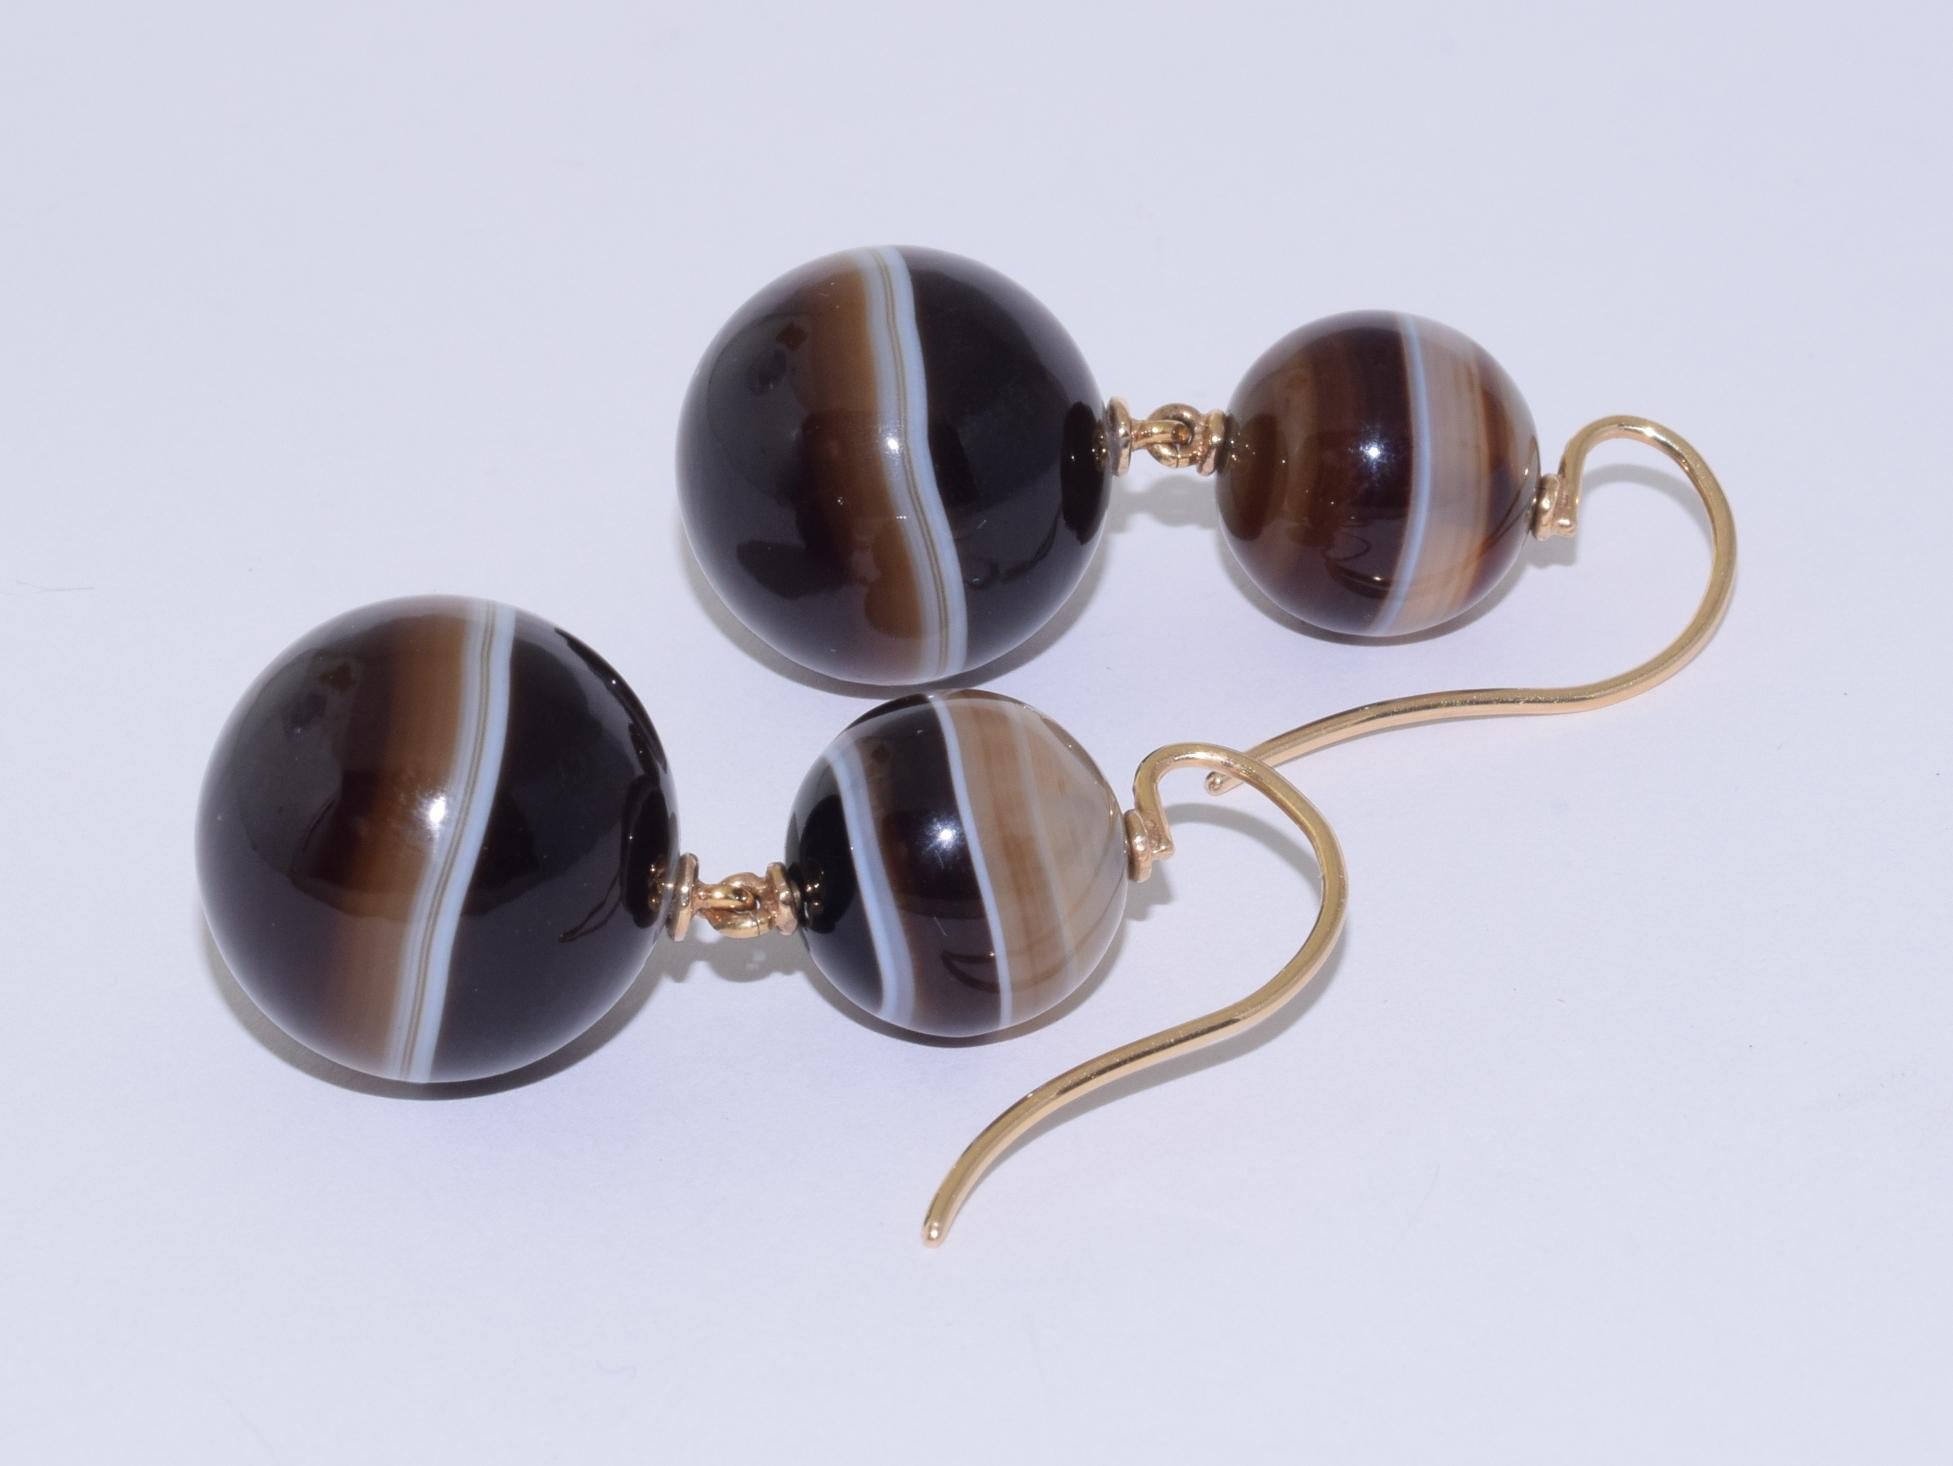 Graduated banded agate beads are joined with fittings of 18 karat yellow gold. Circa 1890s.

Length: 1-5/8